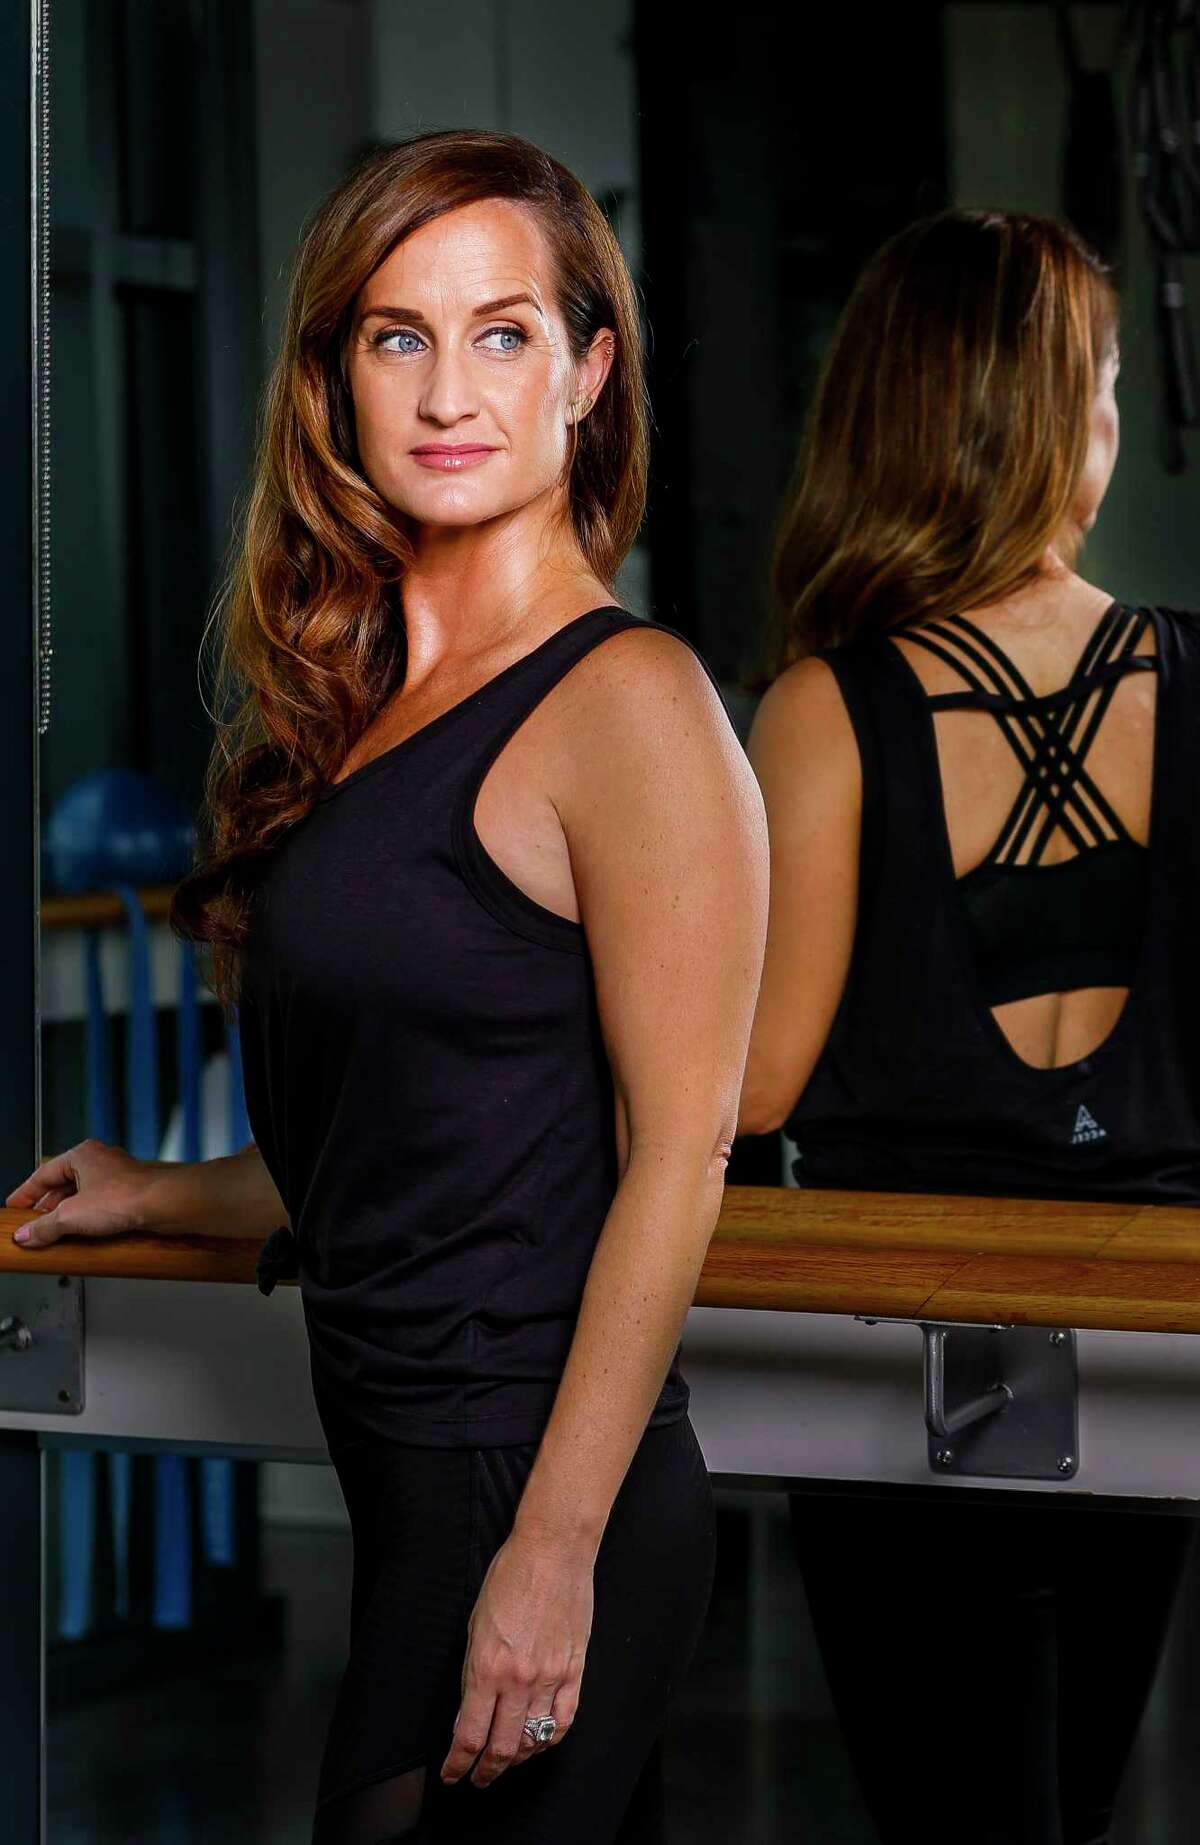 Megan Eddings, who founded Accel Lifestyle, a clothing company who developed what they call "anti-stink" fabric used in workout clothes, wears one of the company's women's tops at Define studio in the Heights in Houston, Monday, Sept. 30, 2019.